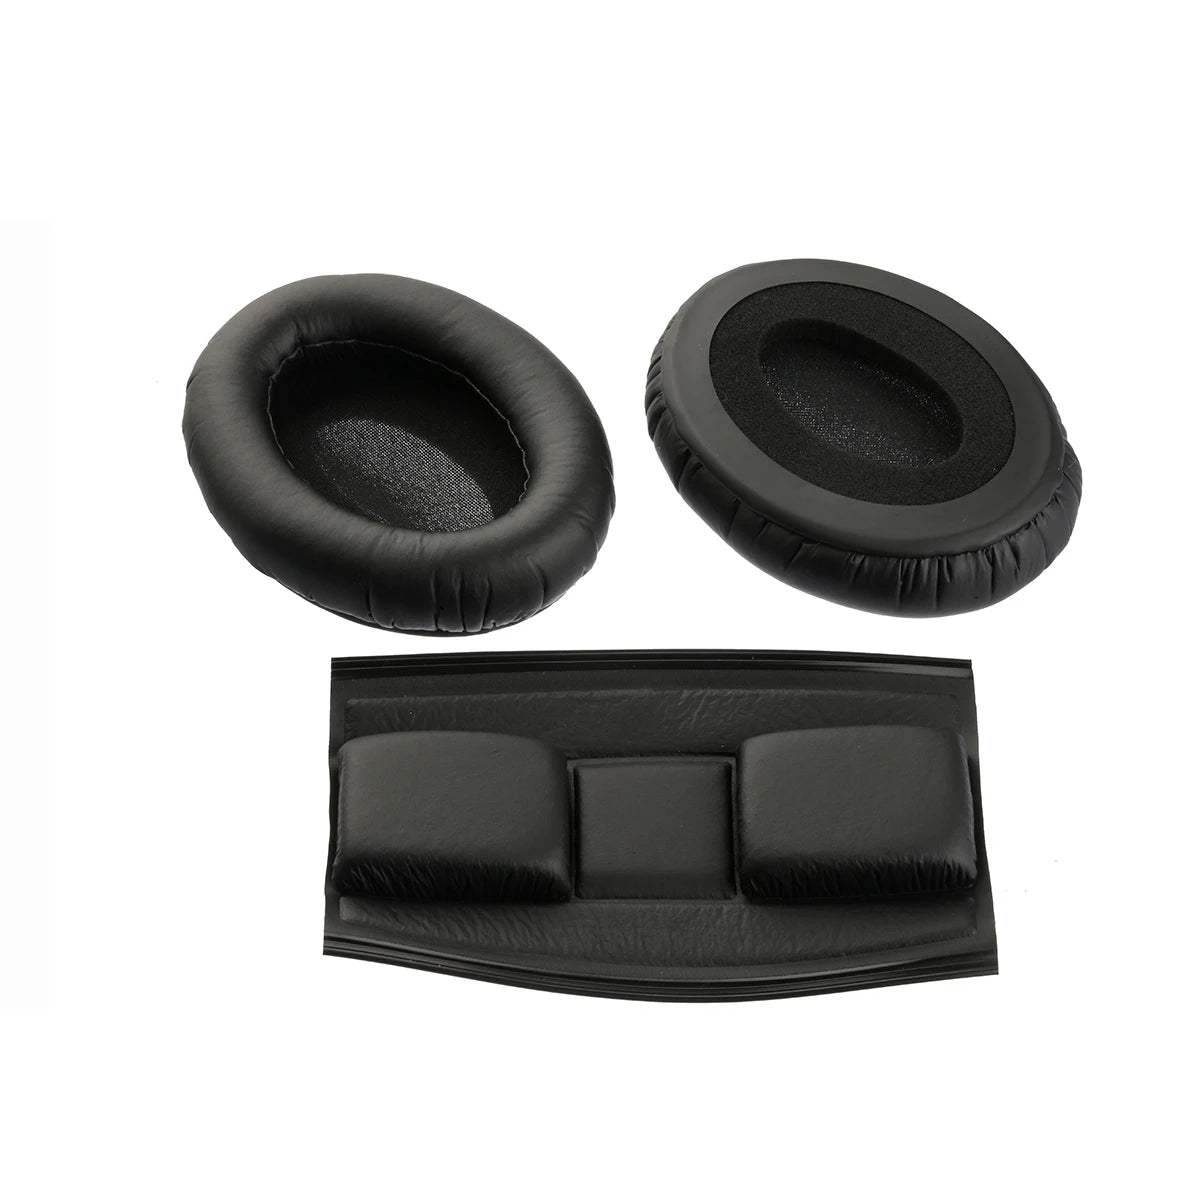 Sennheiser Spares - HD 280 PRO Earpads & Headband Pad Set, Only for PRO 2016 Versions